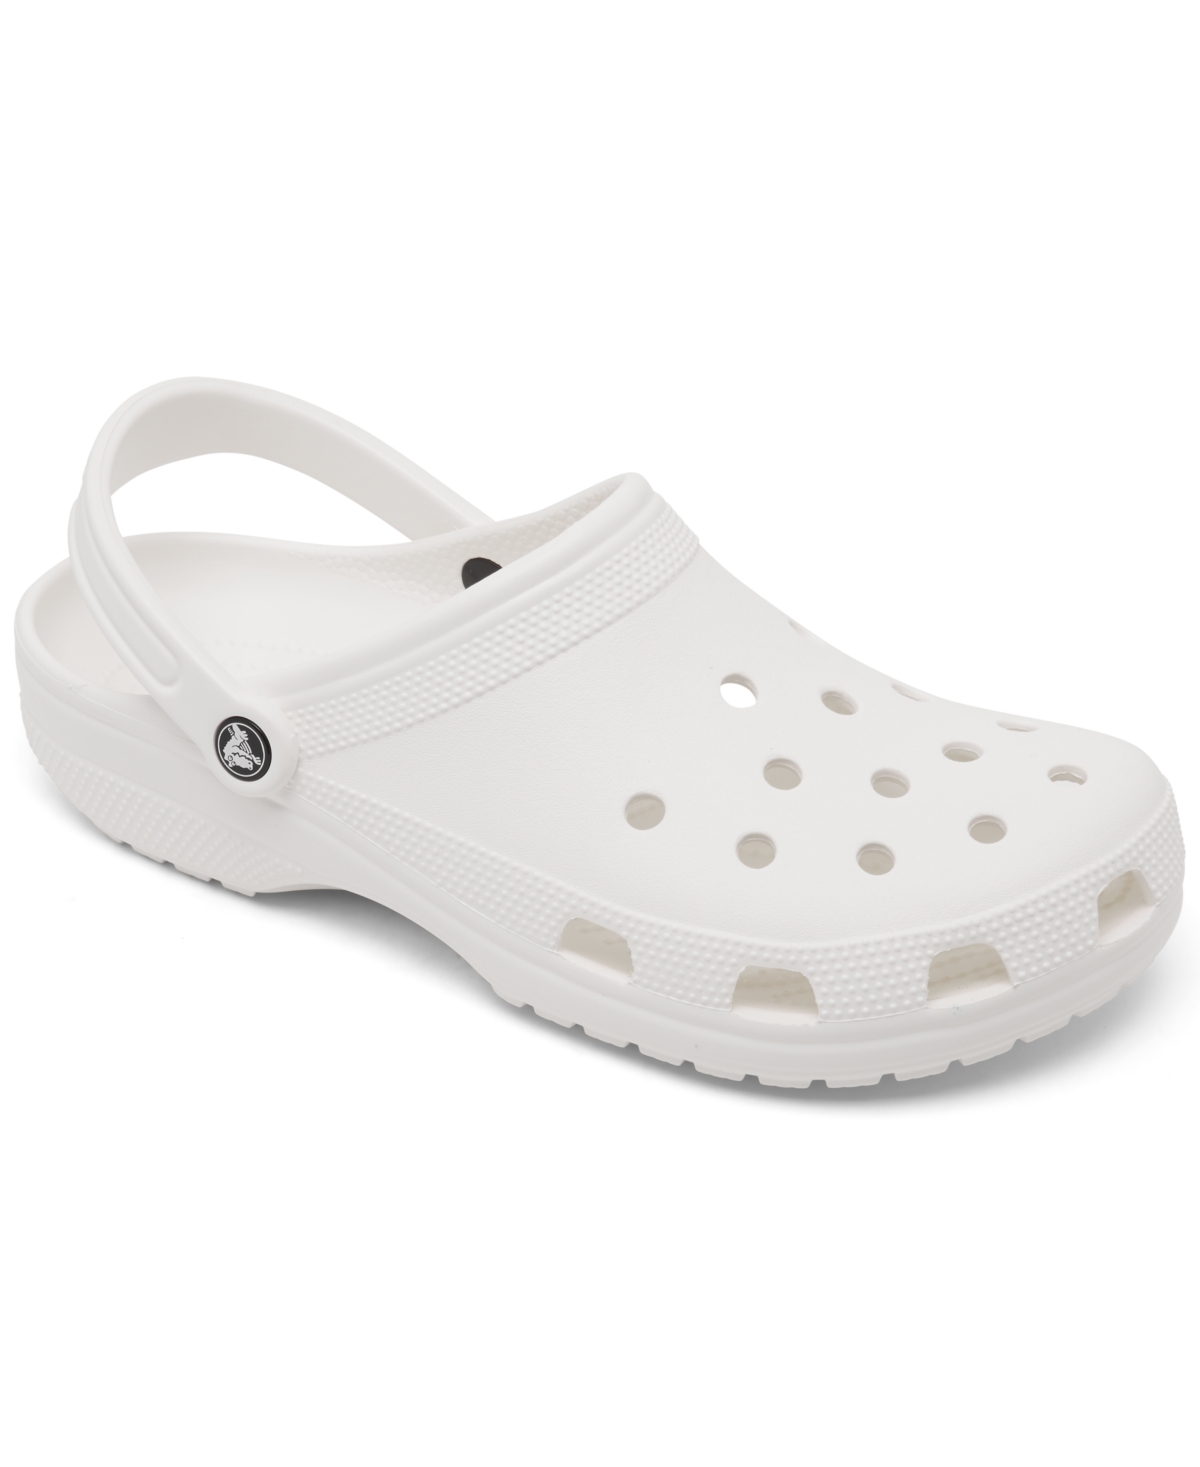 Crocs Men's And Women's Classic Clogs From Finish Line In White